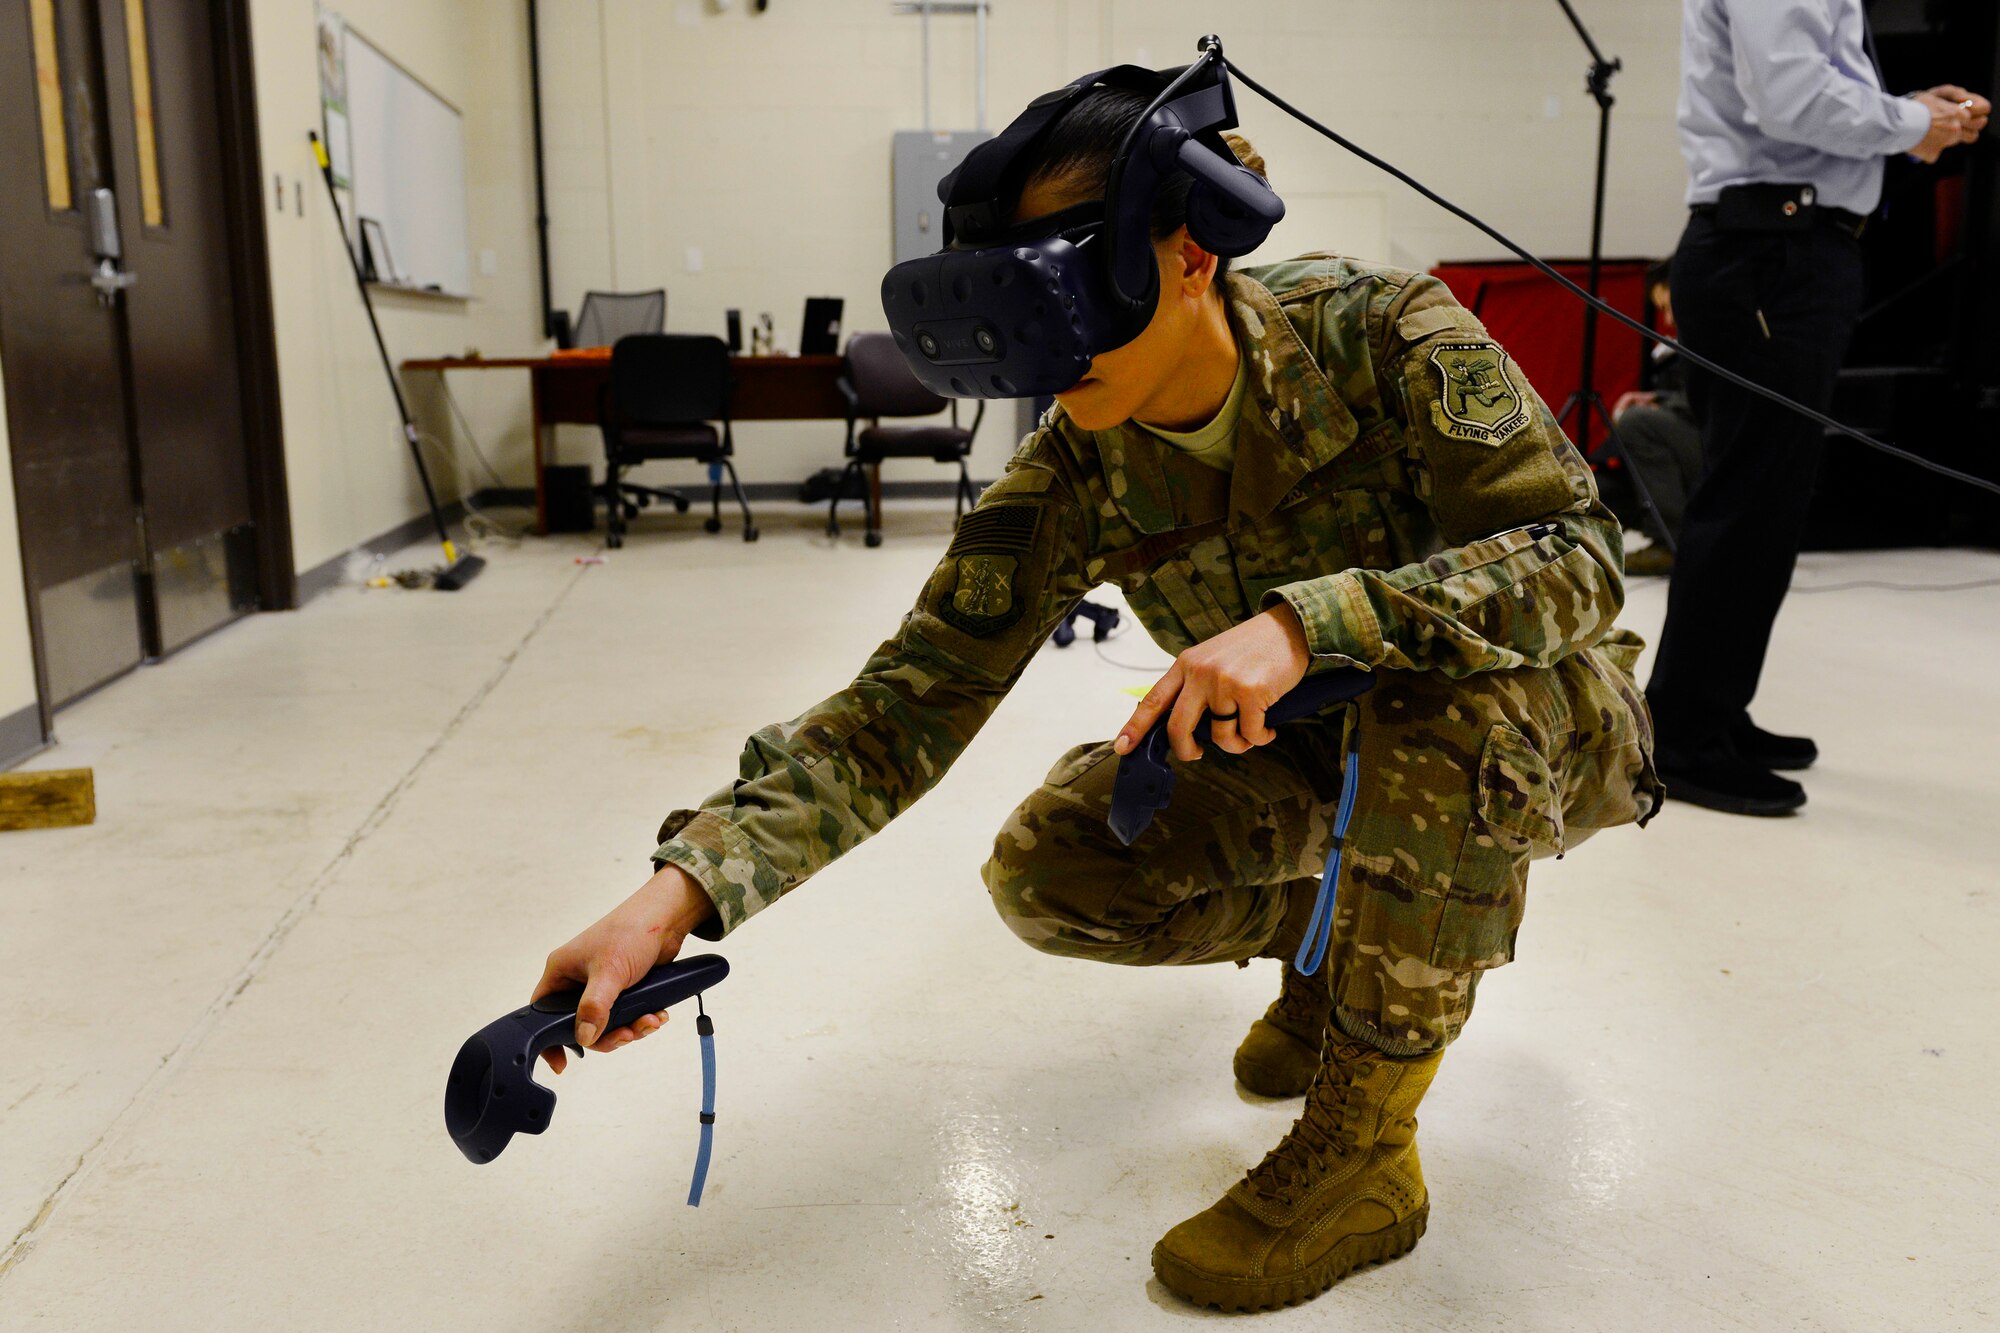 1st Lt. Jen Pierce, 103rd Airlift Wing, trains on the Virtual Loadmaster Training System (VLTS) March 29, 2019 at Bradley Air National Guard Base, Conn. The VLTS provides loadmasters the opportunity to practice in-flight emergency situations that would not be practical in real world application. (U.S. Air Force photo by Staff Sgt. Chad Warren)